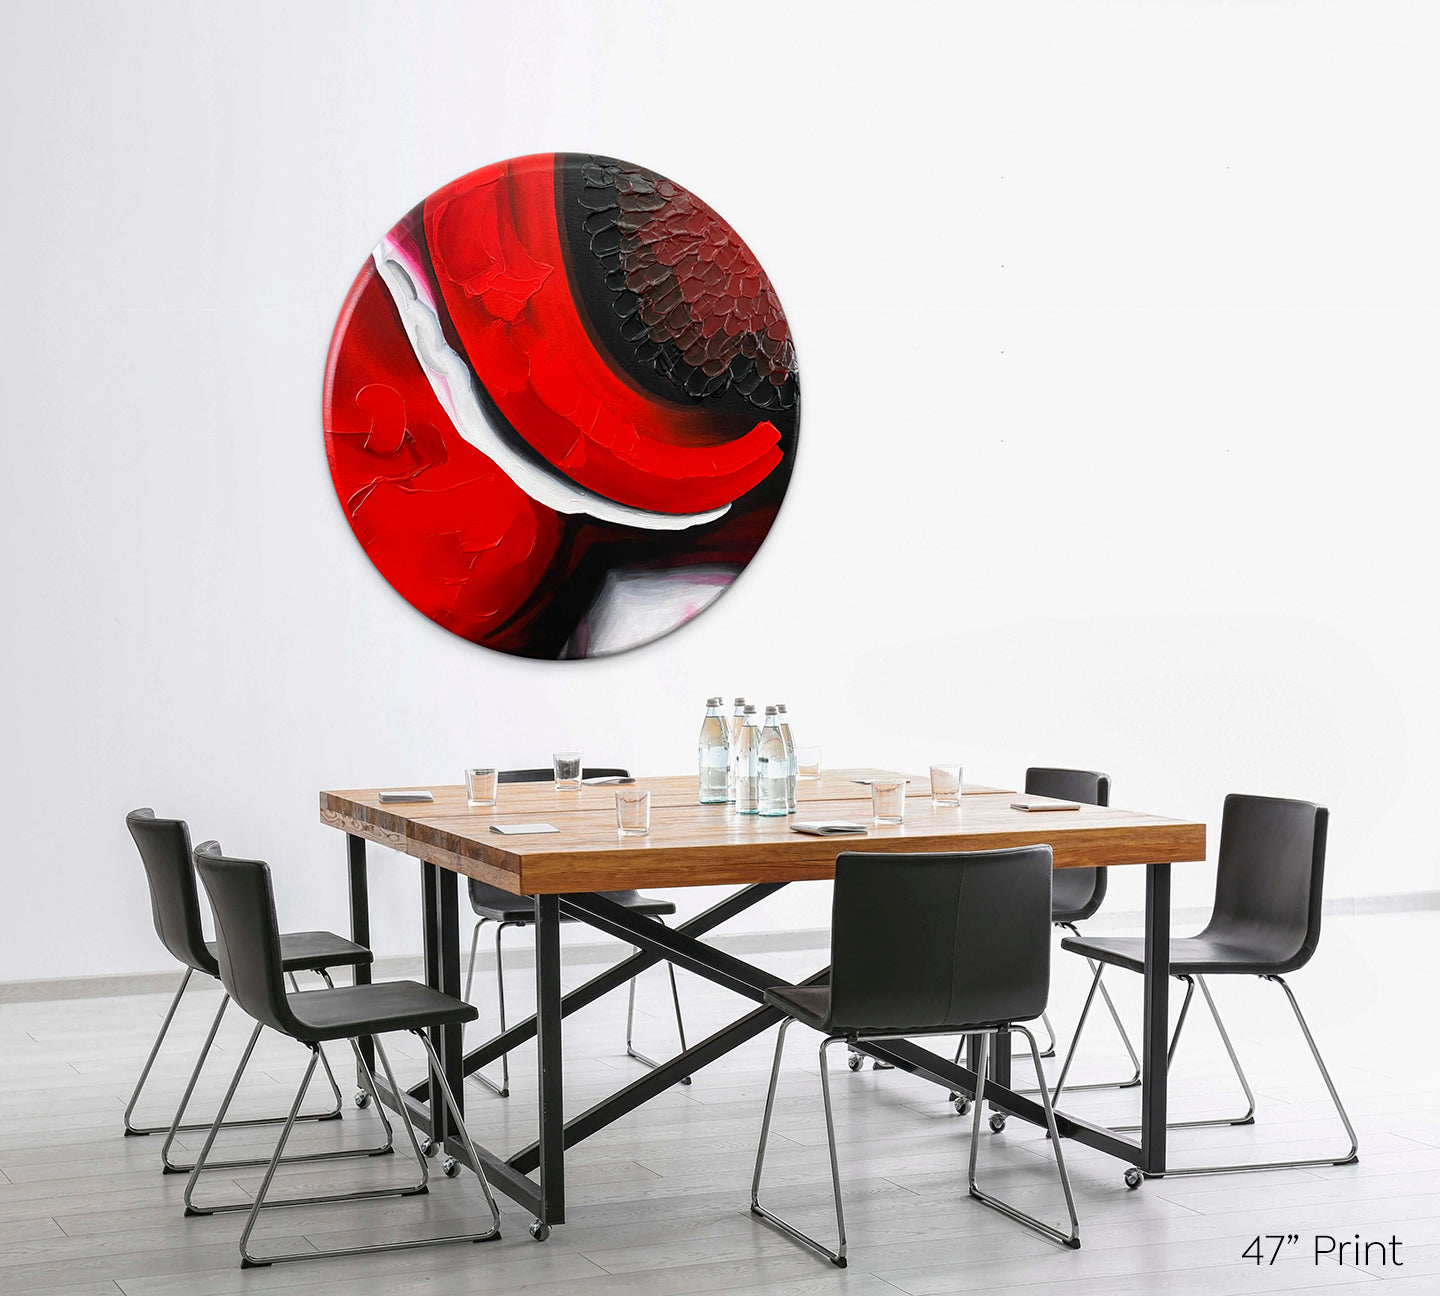 Abstract, acrylic and mixed-media 47” print on a round canvas with curved-edges shown on a white wall above a dining room table